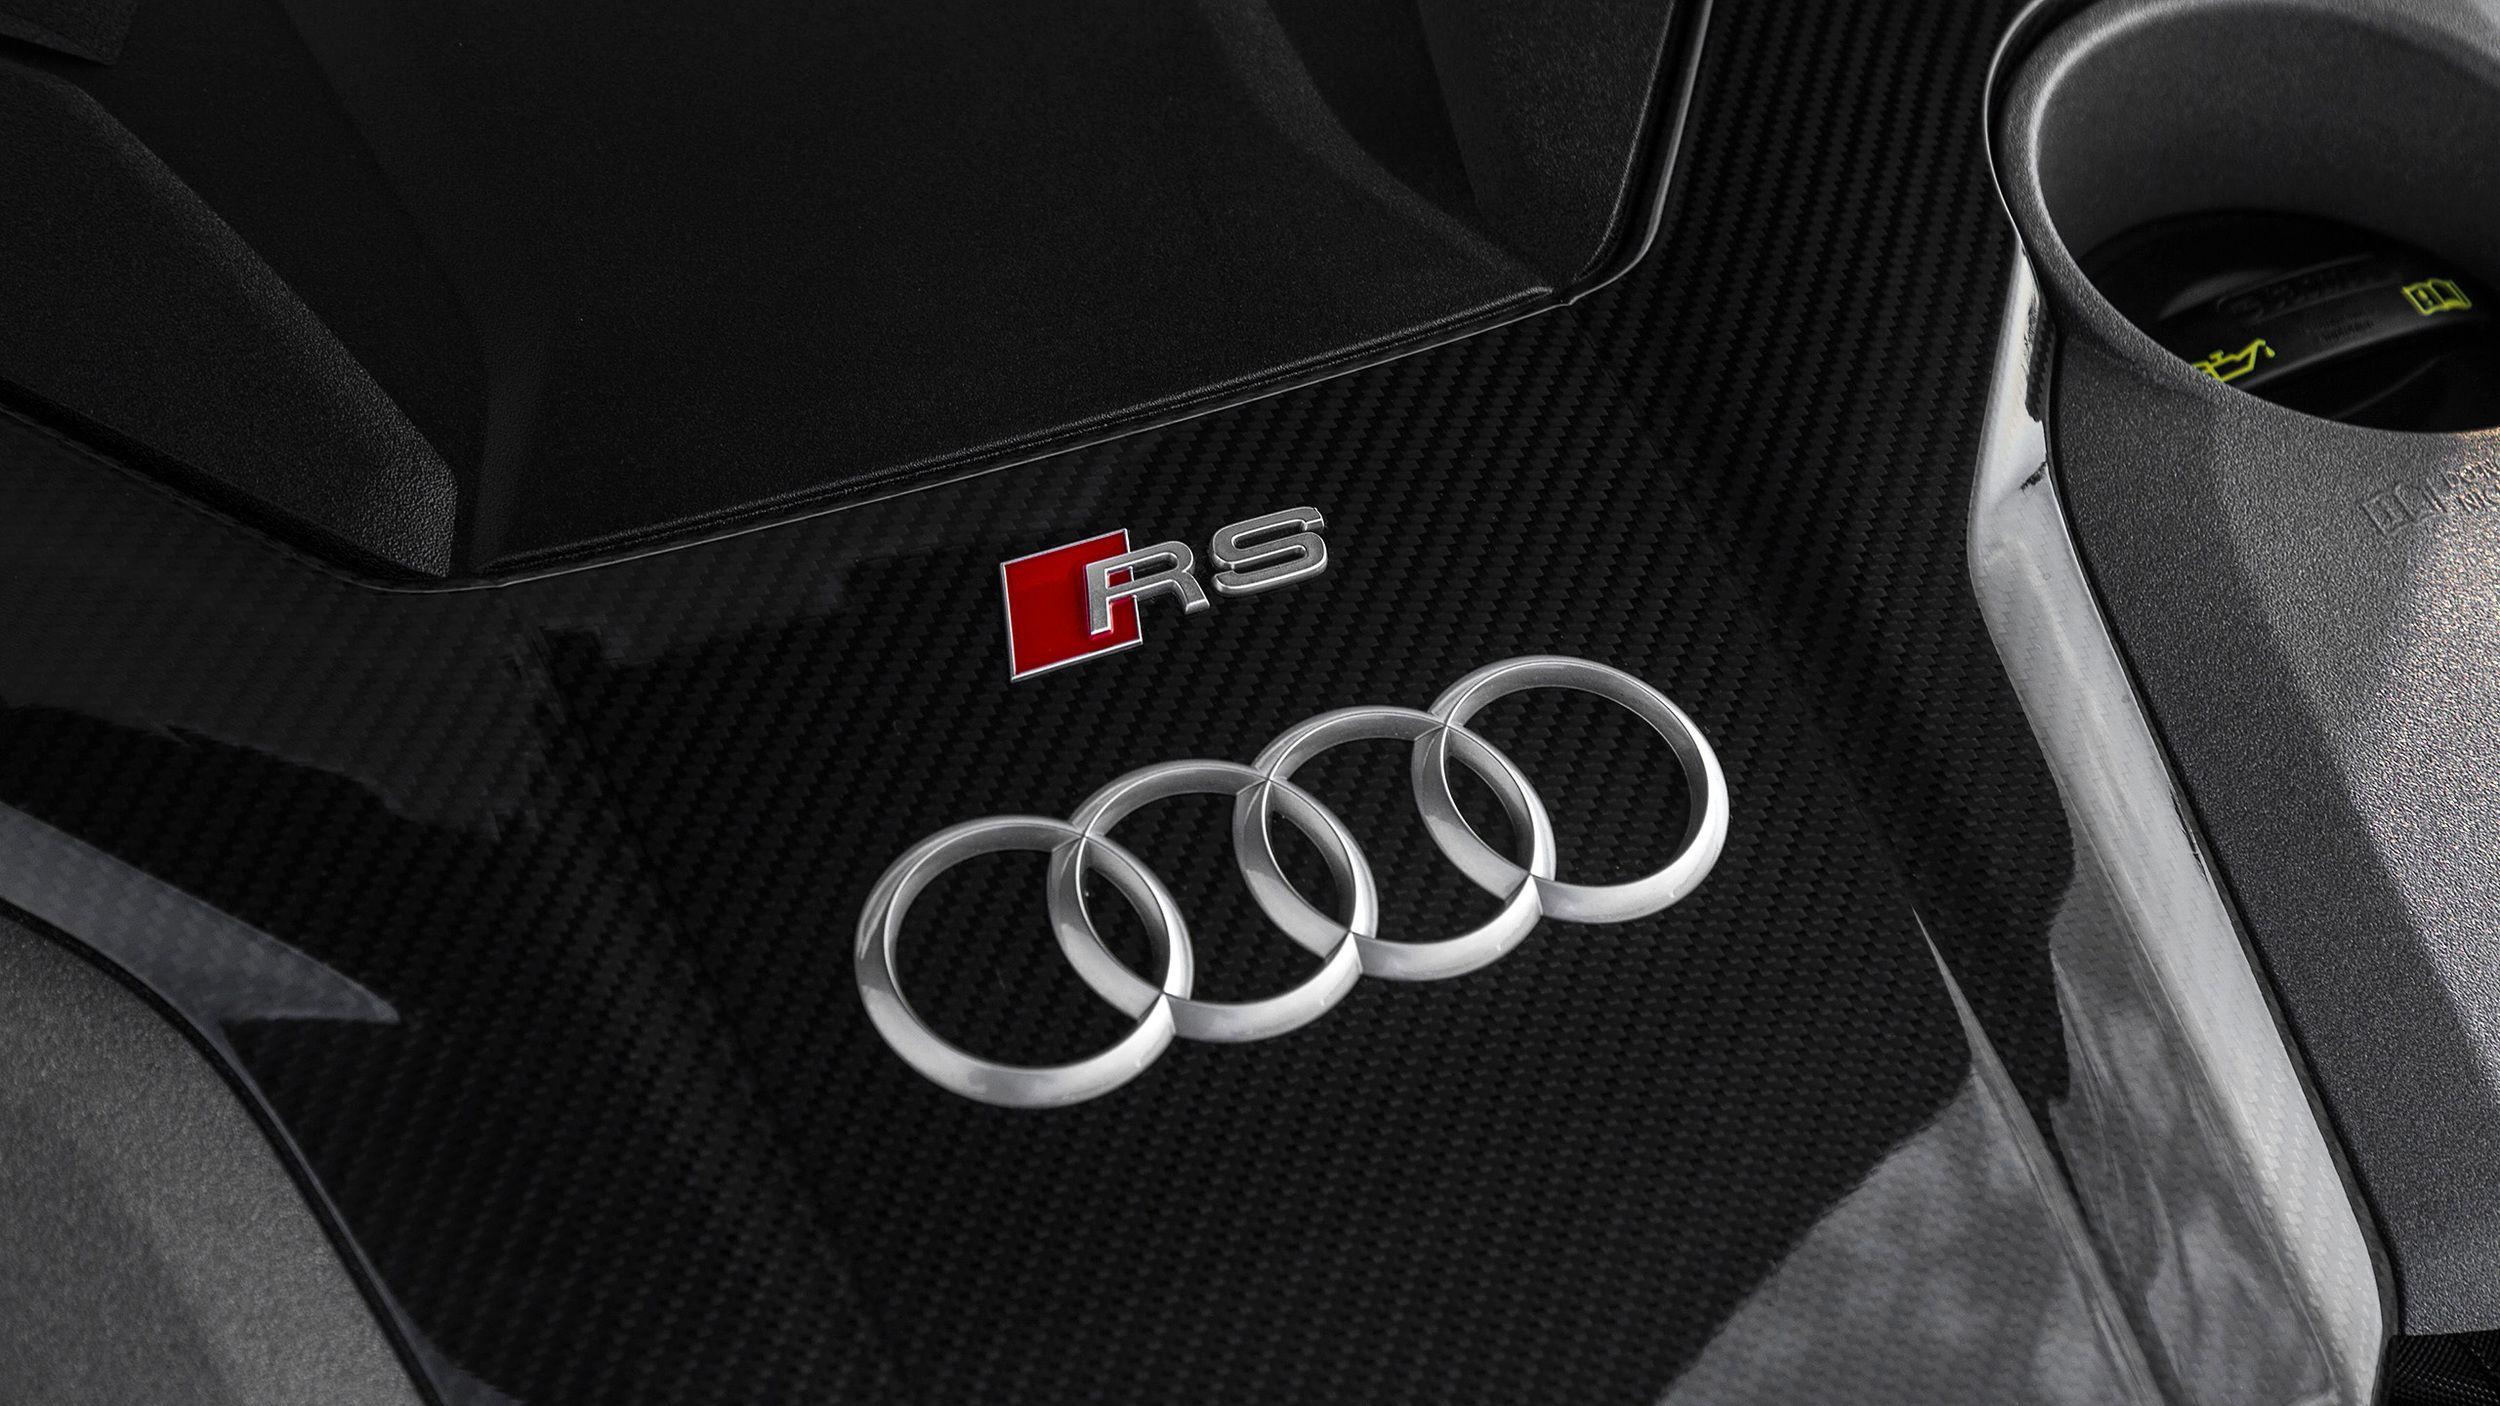 Audi RS5 Logo - 2019 Audi RS5 Sportback: First Drive Photo Gallery - Autoblog